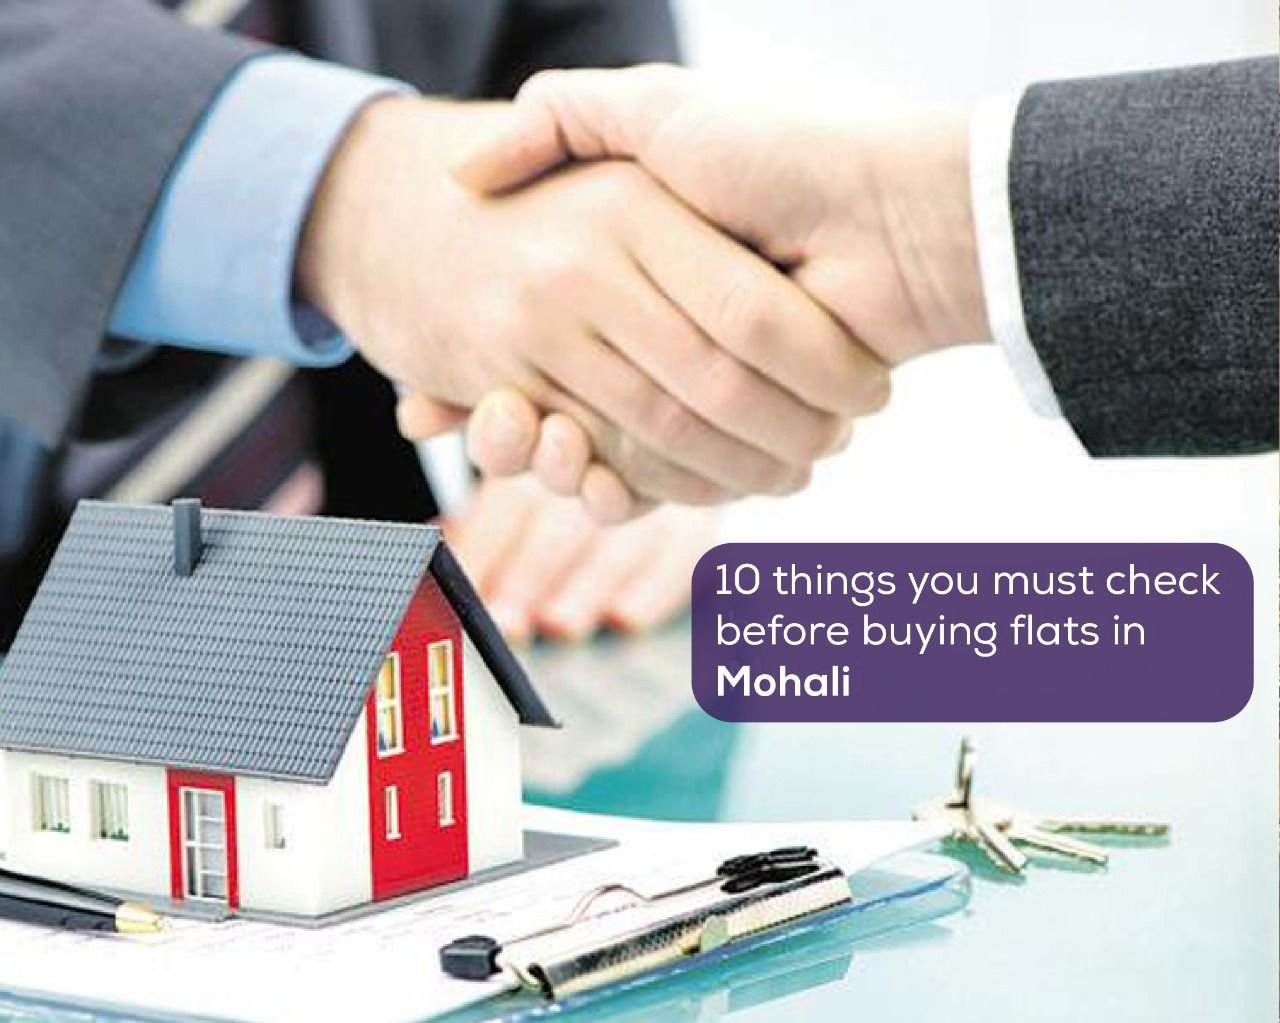 10 things you must check before buying flats in Mohal